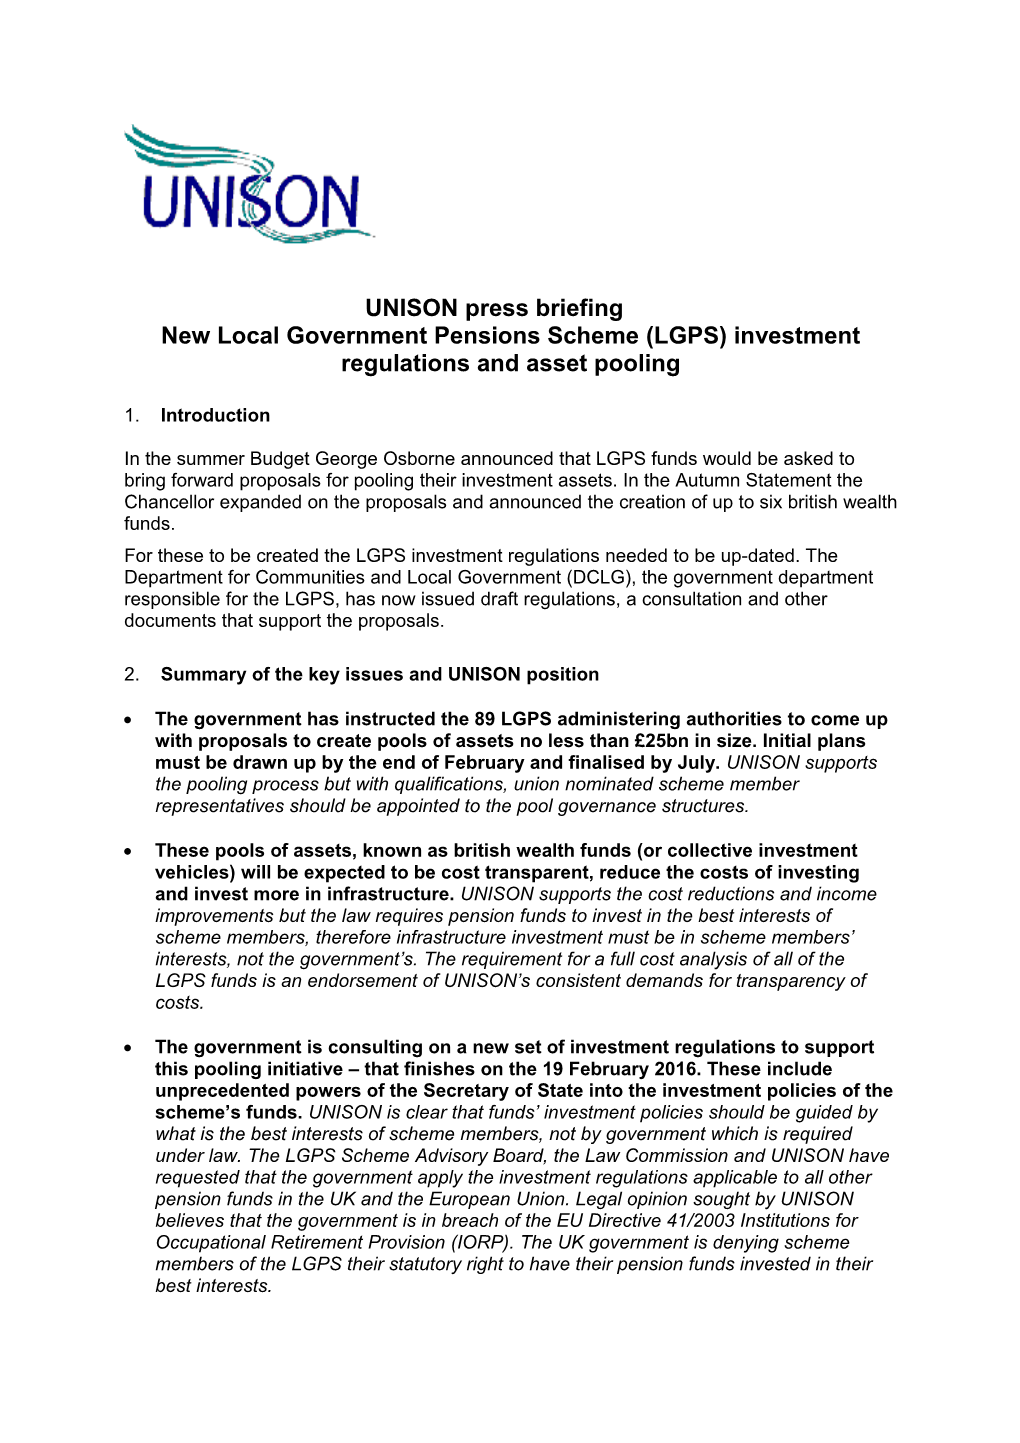 New Local Government Pensions Scheme(LGPS) Investment Regulations and Asset Pooling